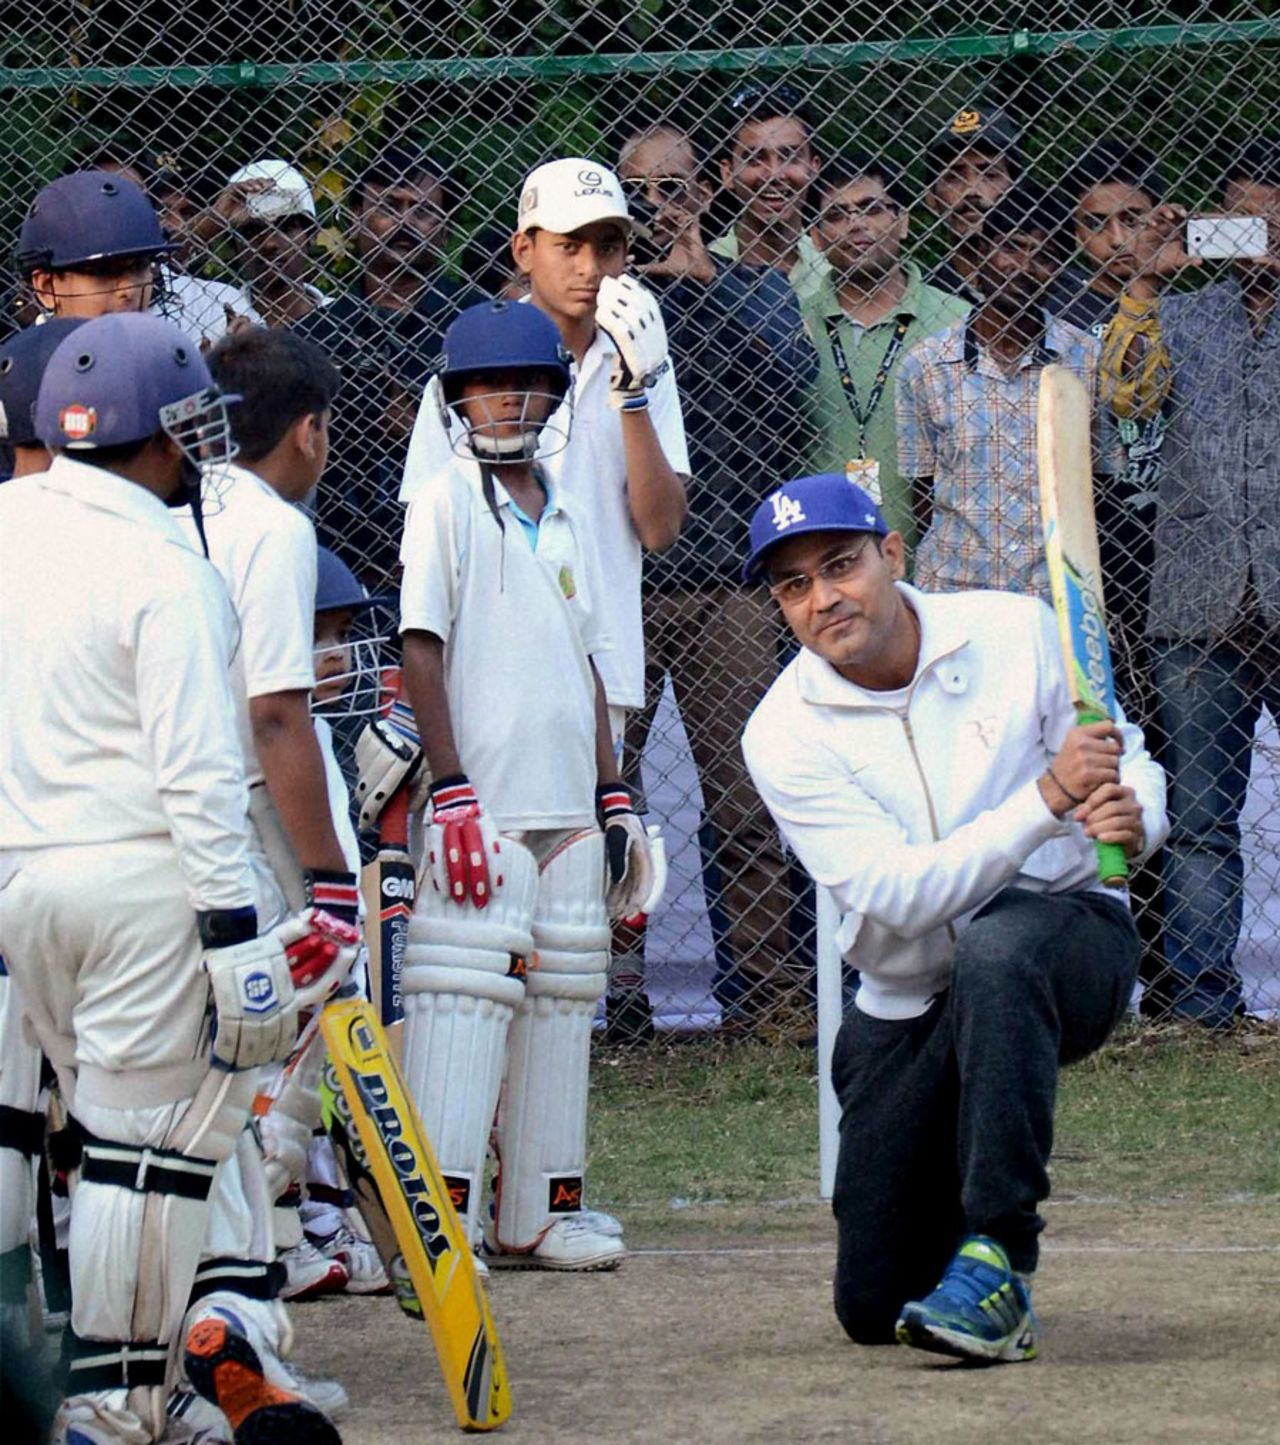 Virender Sehwag with kids at a batting clinic in Bhopal, November 21, 2015